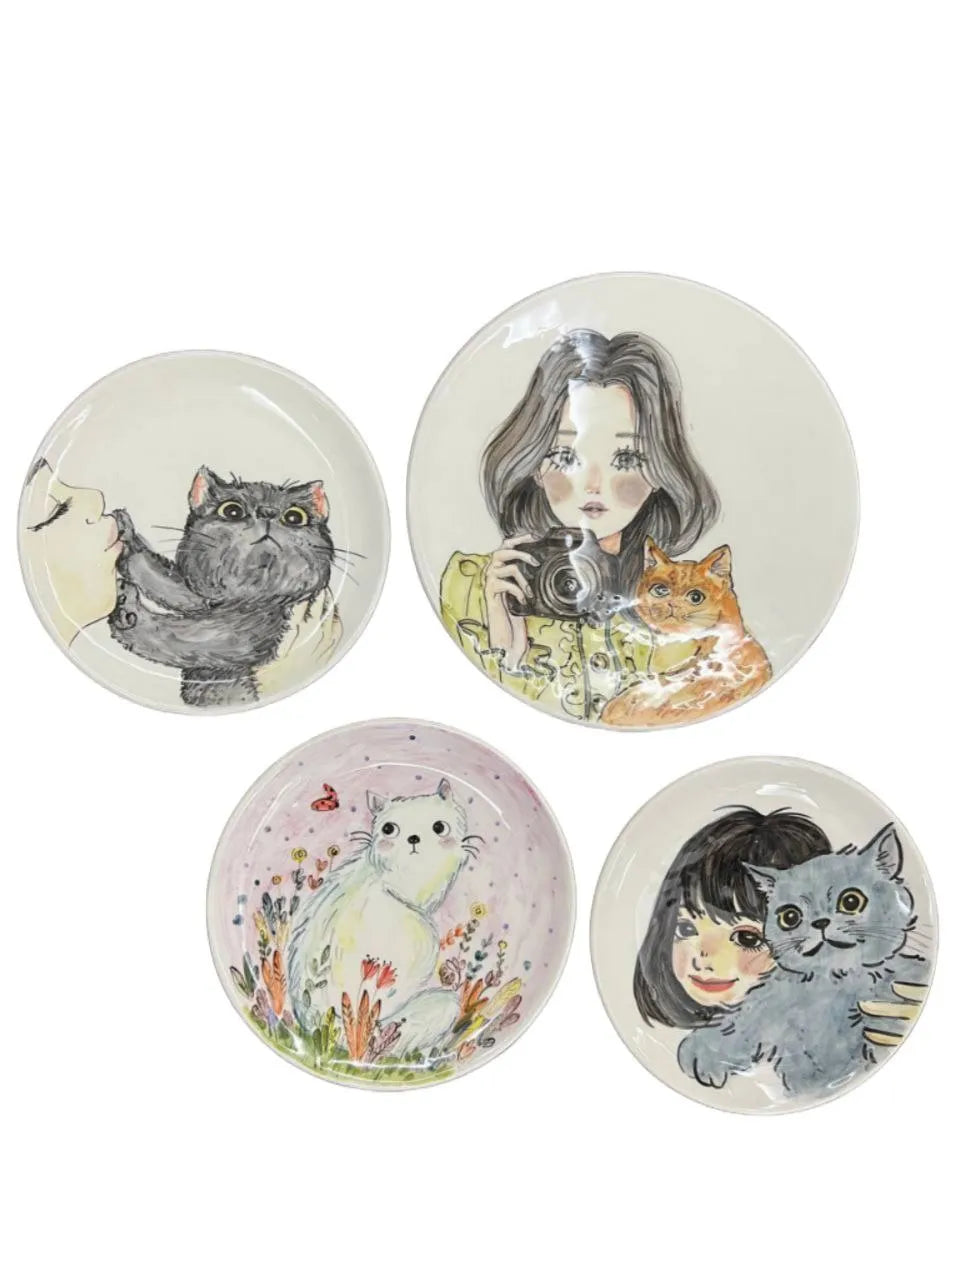 Set of 4 kitty love hand painted ceramic plates, 35cm girls & cats theme home decoration